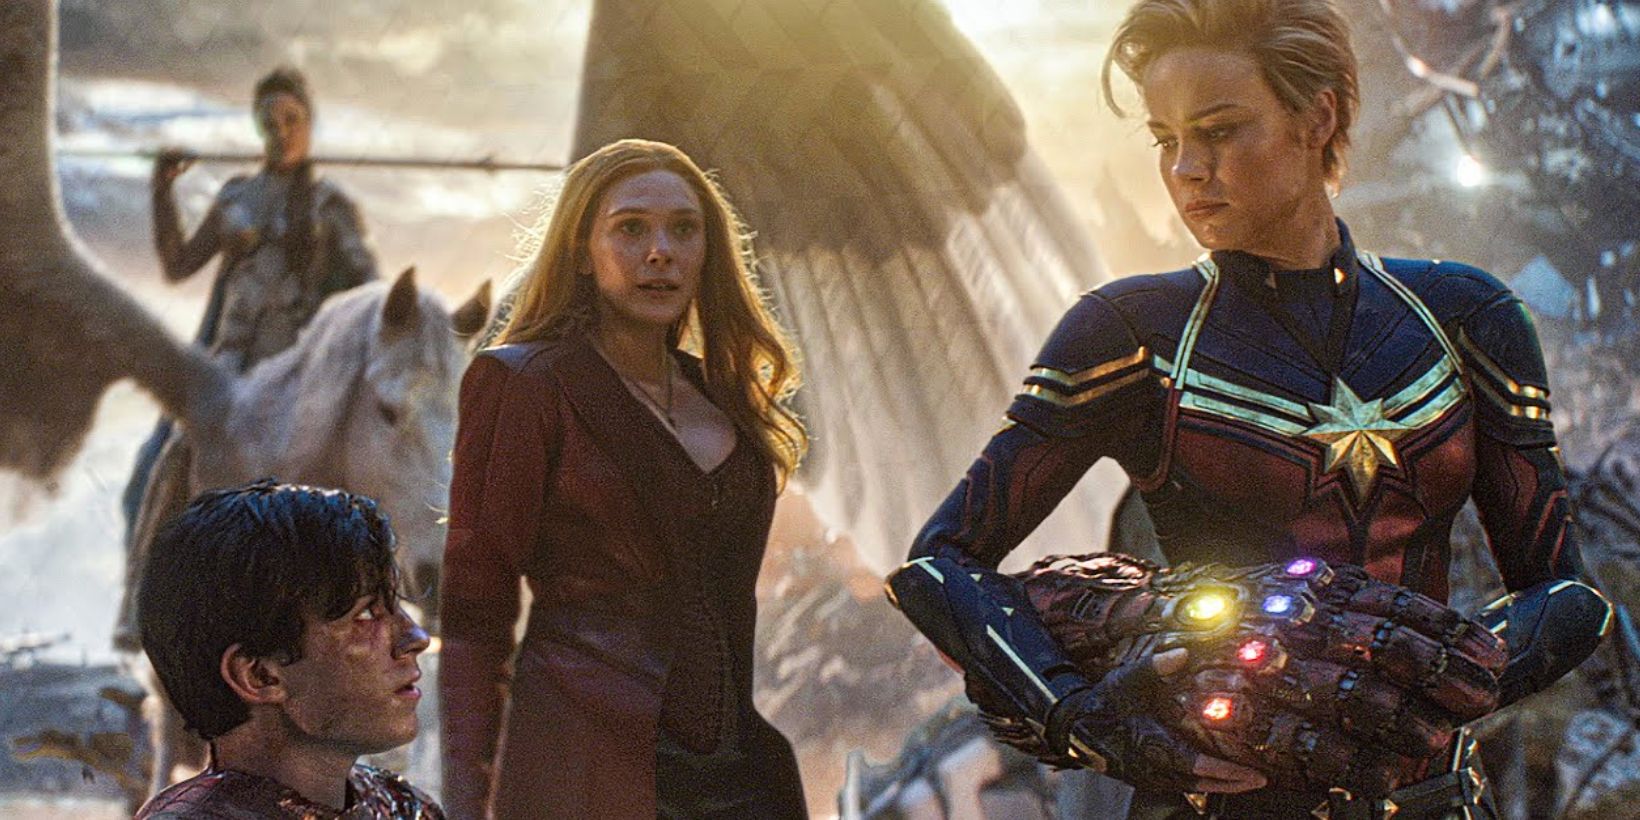 Valkyrie, Wanda Maximoff, and Carlo Danvers surround Peter Parker to protect the Infinity Gauntlet in Avengers: Endgame